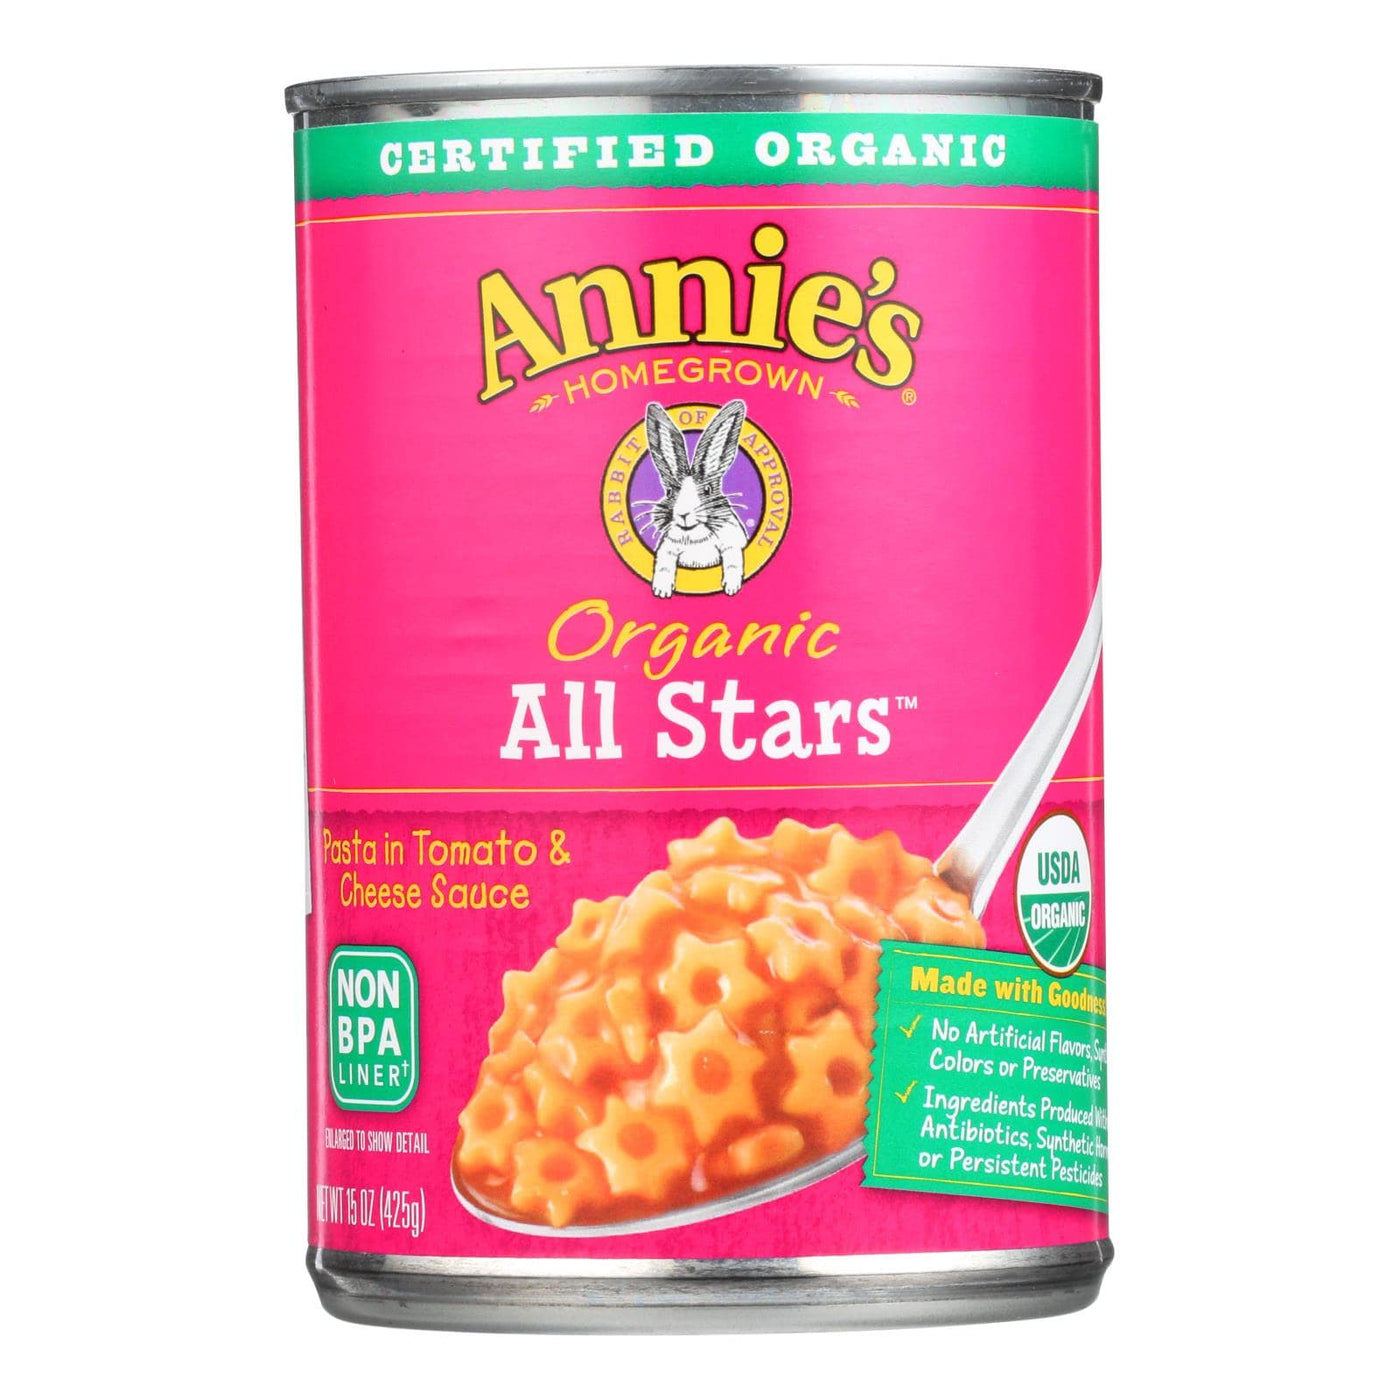 Buy Annie's Homegrown Organic All Stars Pasta In Tomato And Cheese Sauce - Case Of 12 - 15 Oz.  at OnlyNaturals.us